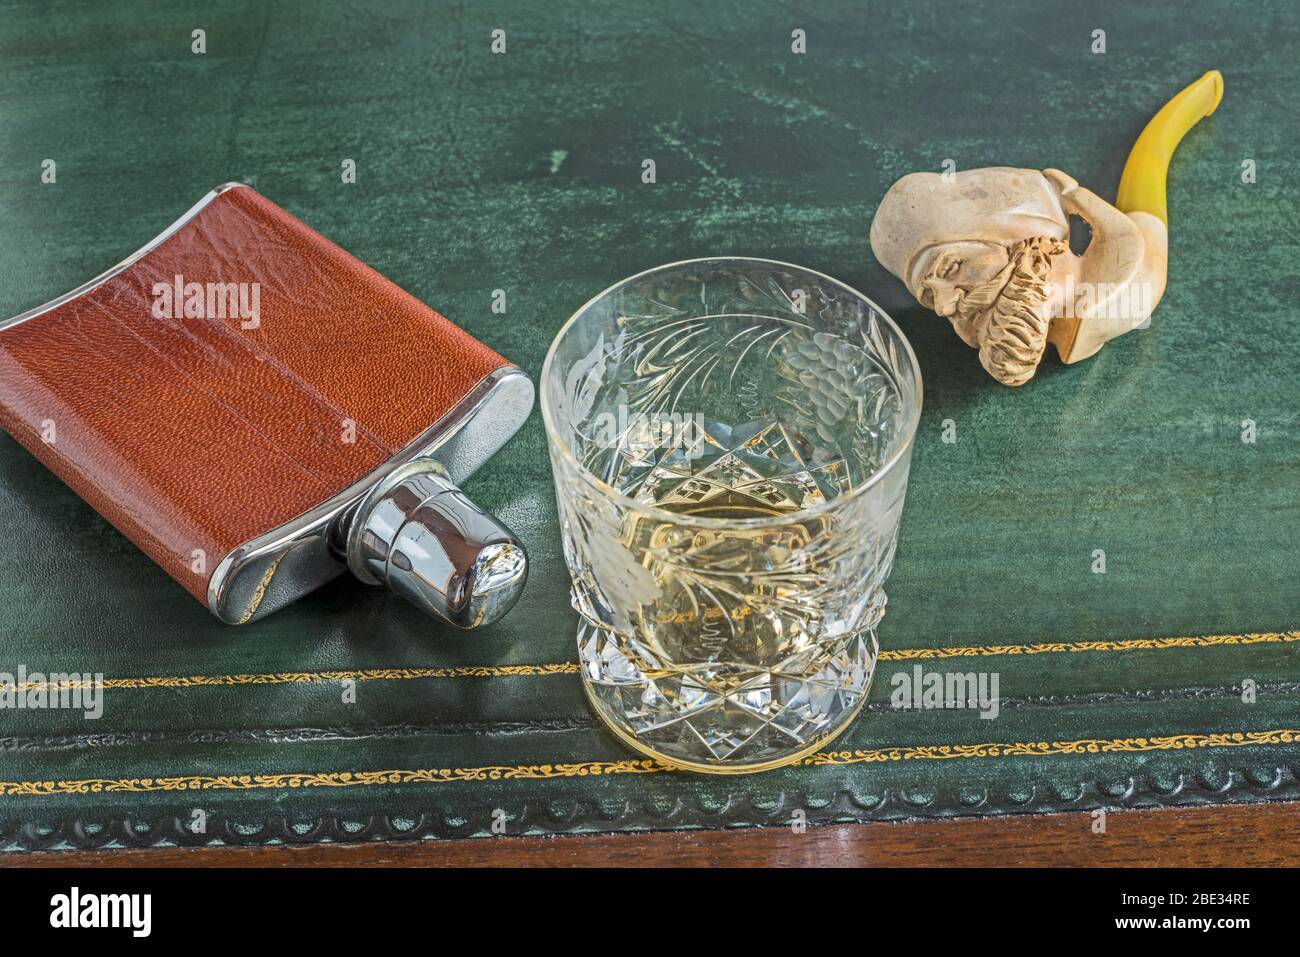 Hip flask, whisky glass, Meerschaum pipe on green leather table. Concept. Gentleman’s study, relaxation, social isolation, nostalgia, own company. Stock Photo